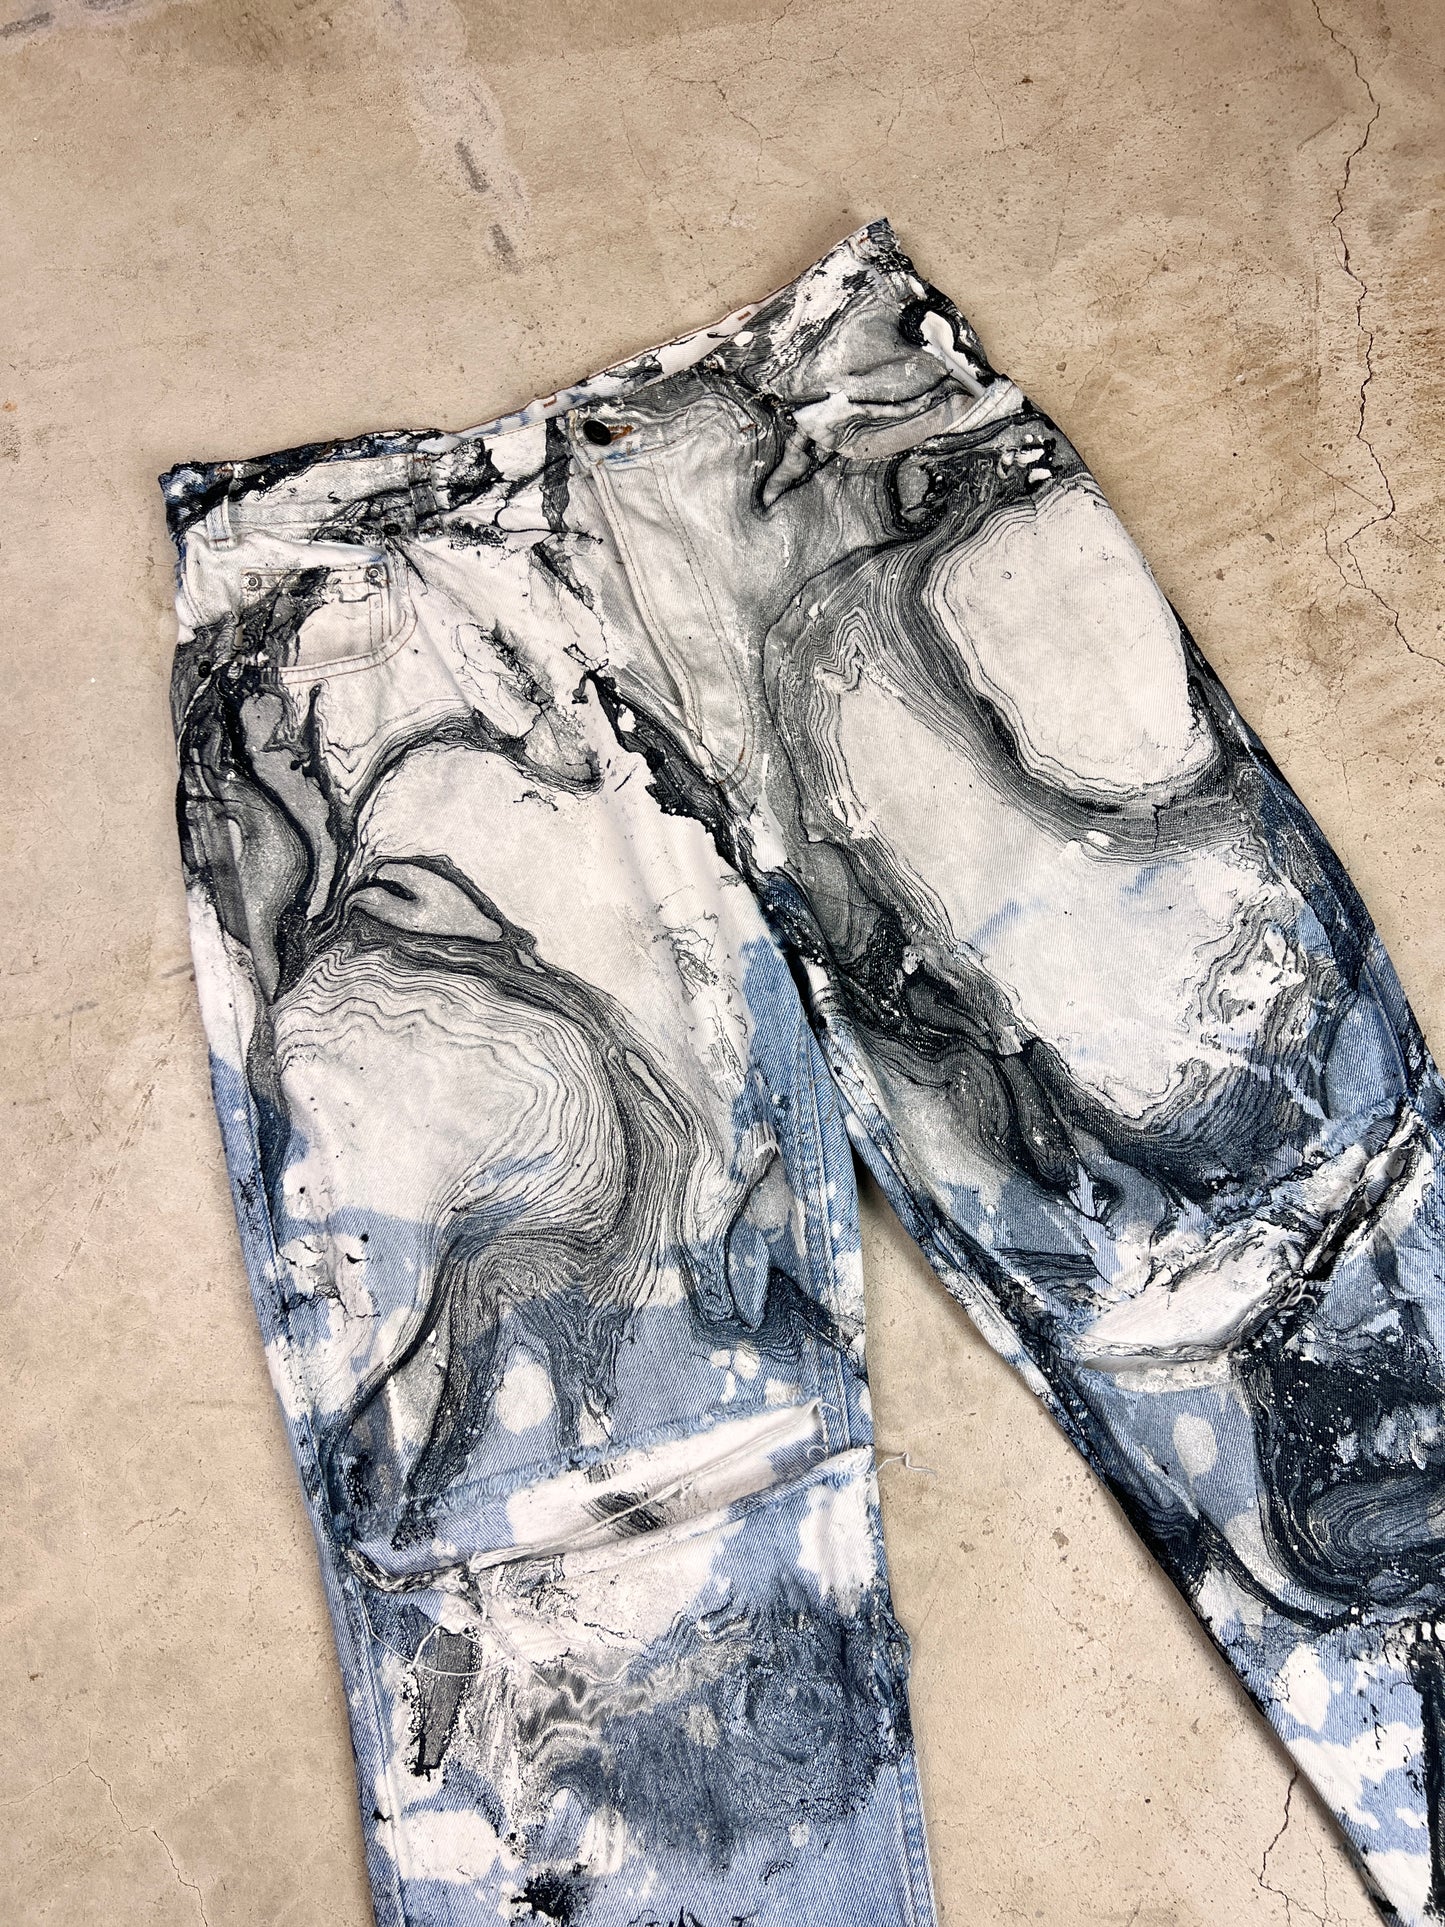 The Bleached & Marbled Straight Leg Jeans - 36"